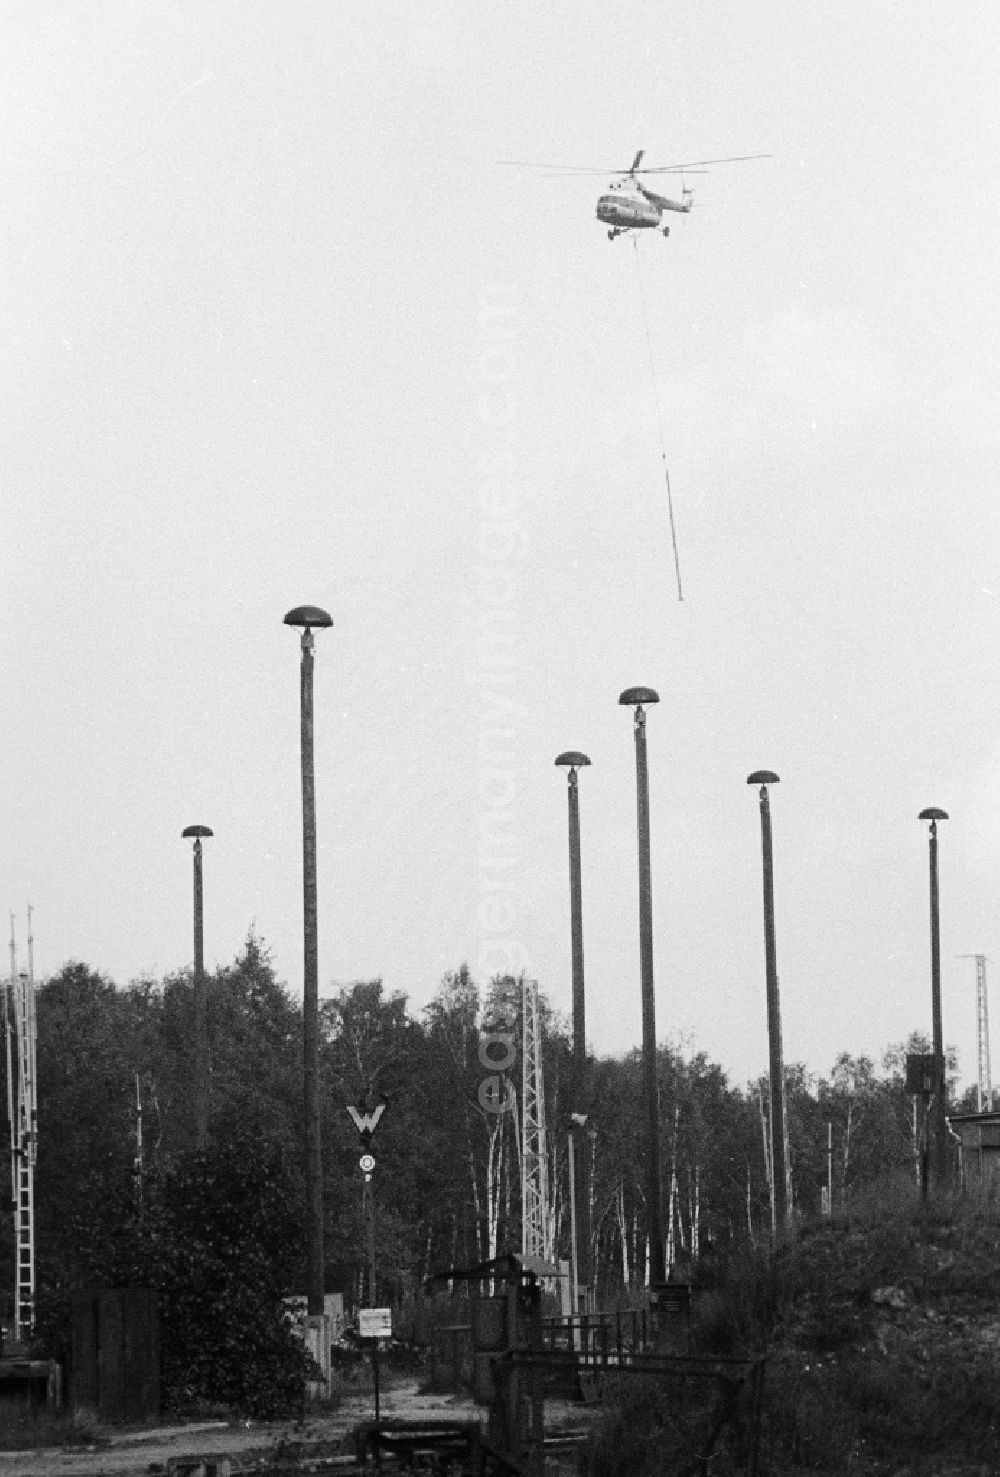 Seddiner See: A transport helicopter of the type Mi8 transports driving poles to the railway station Seddin of the German national railway in Seddiner See in the federal state Brandenburg in the area of the former GDR, German democratic republic